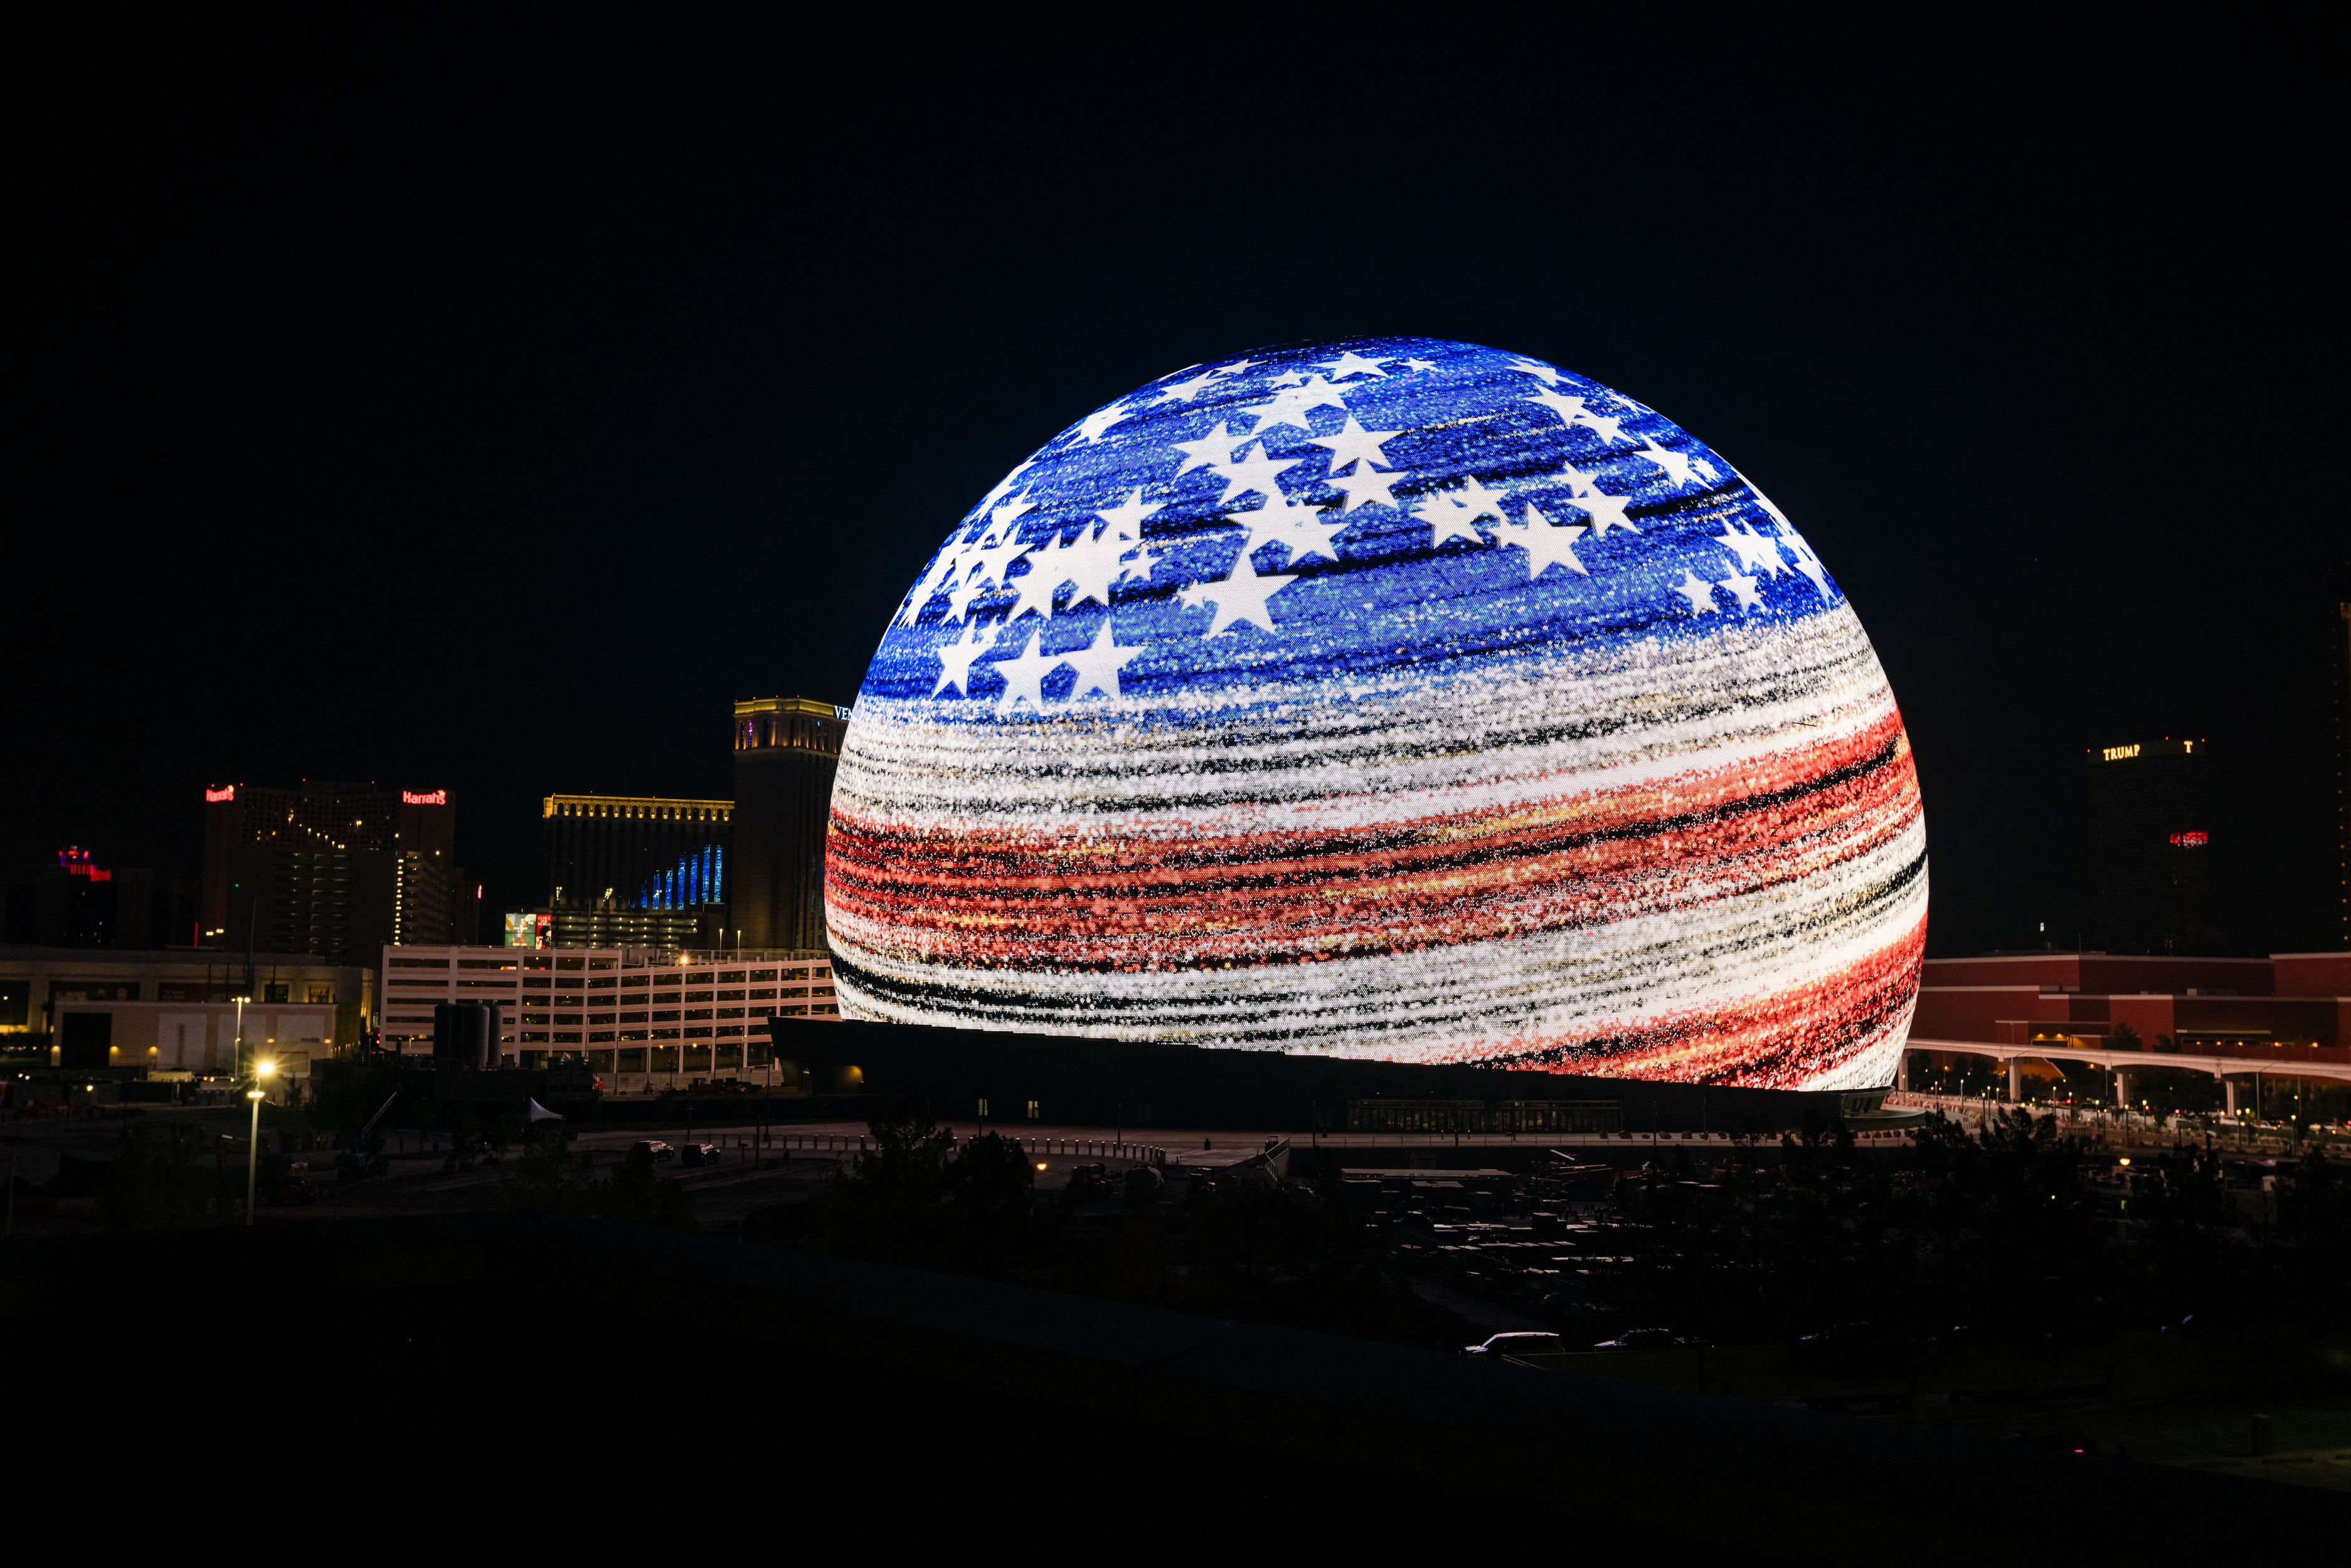 The Sphere in Las Vegas: 5 things to know about this $2.3 billion